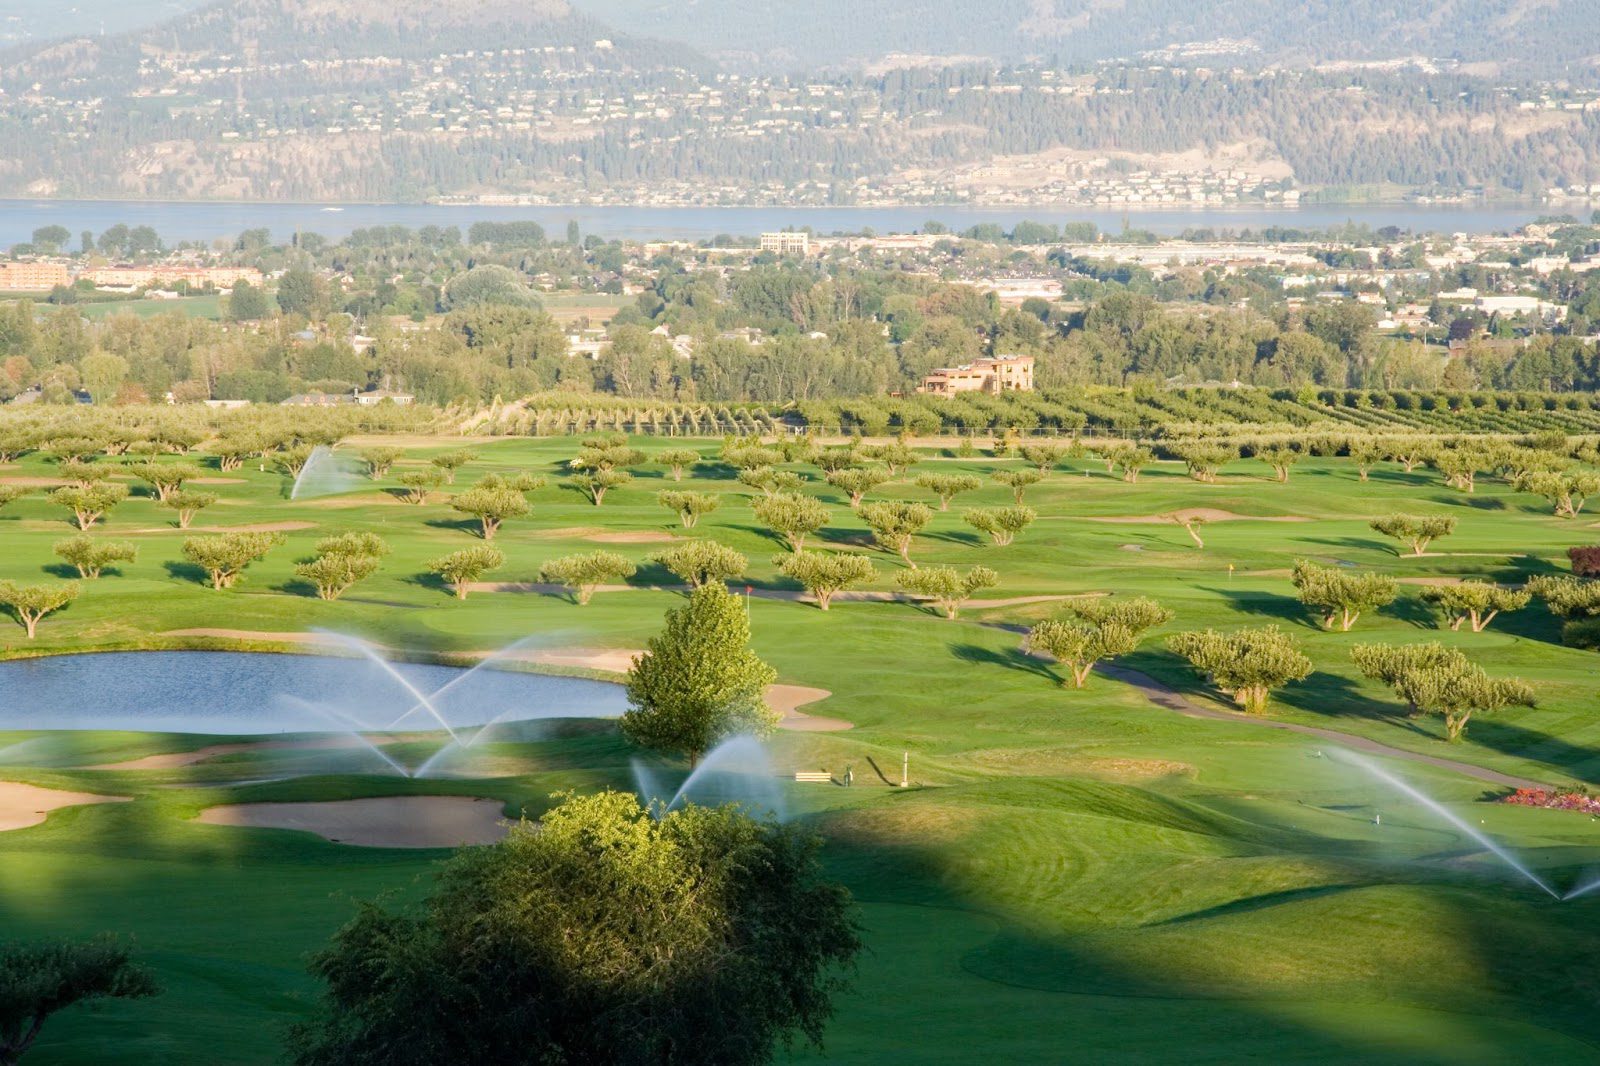 valley view of one of the best golf courses in Kelowna, with sprinklers over greens on a sunny day and the lake in the background